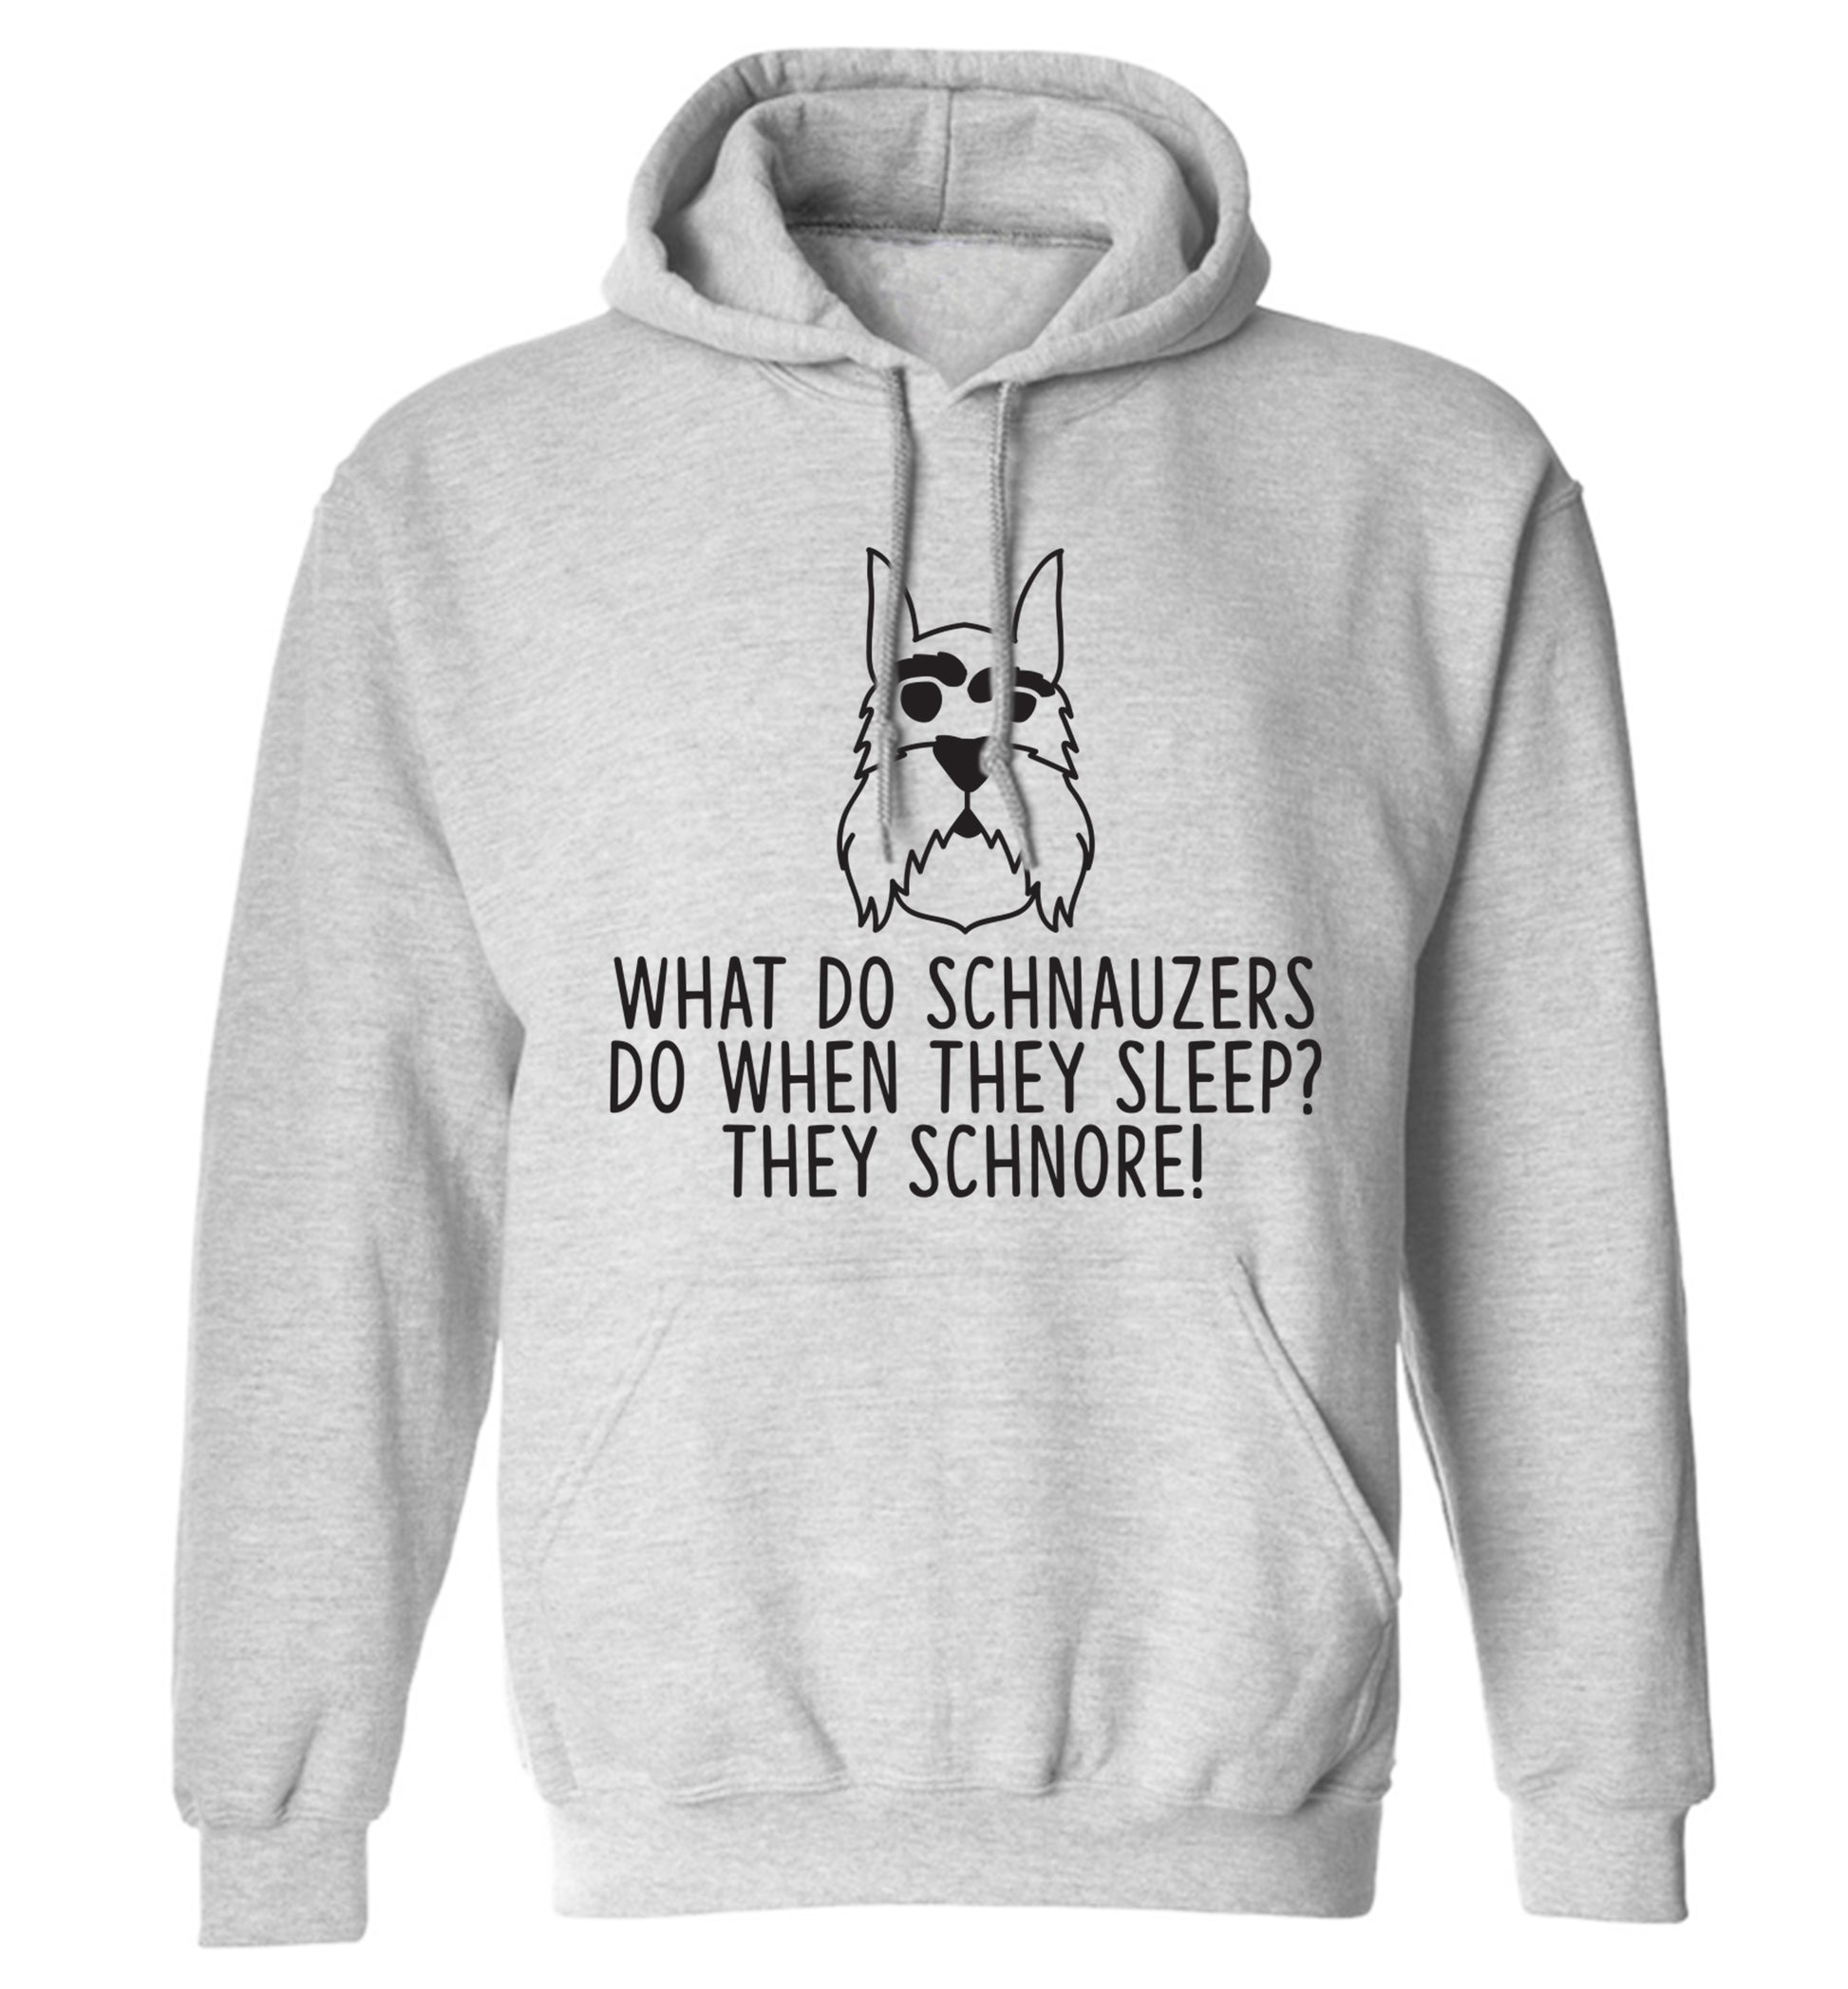 What do schnauzers do when they sleep? Schnore! adults unisex grey hoodie 2XL